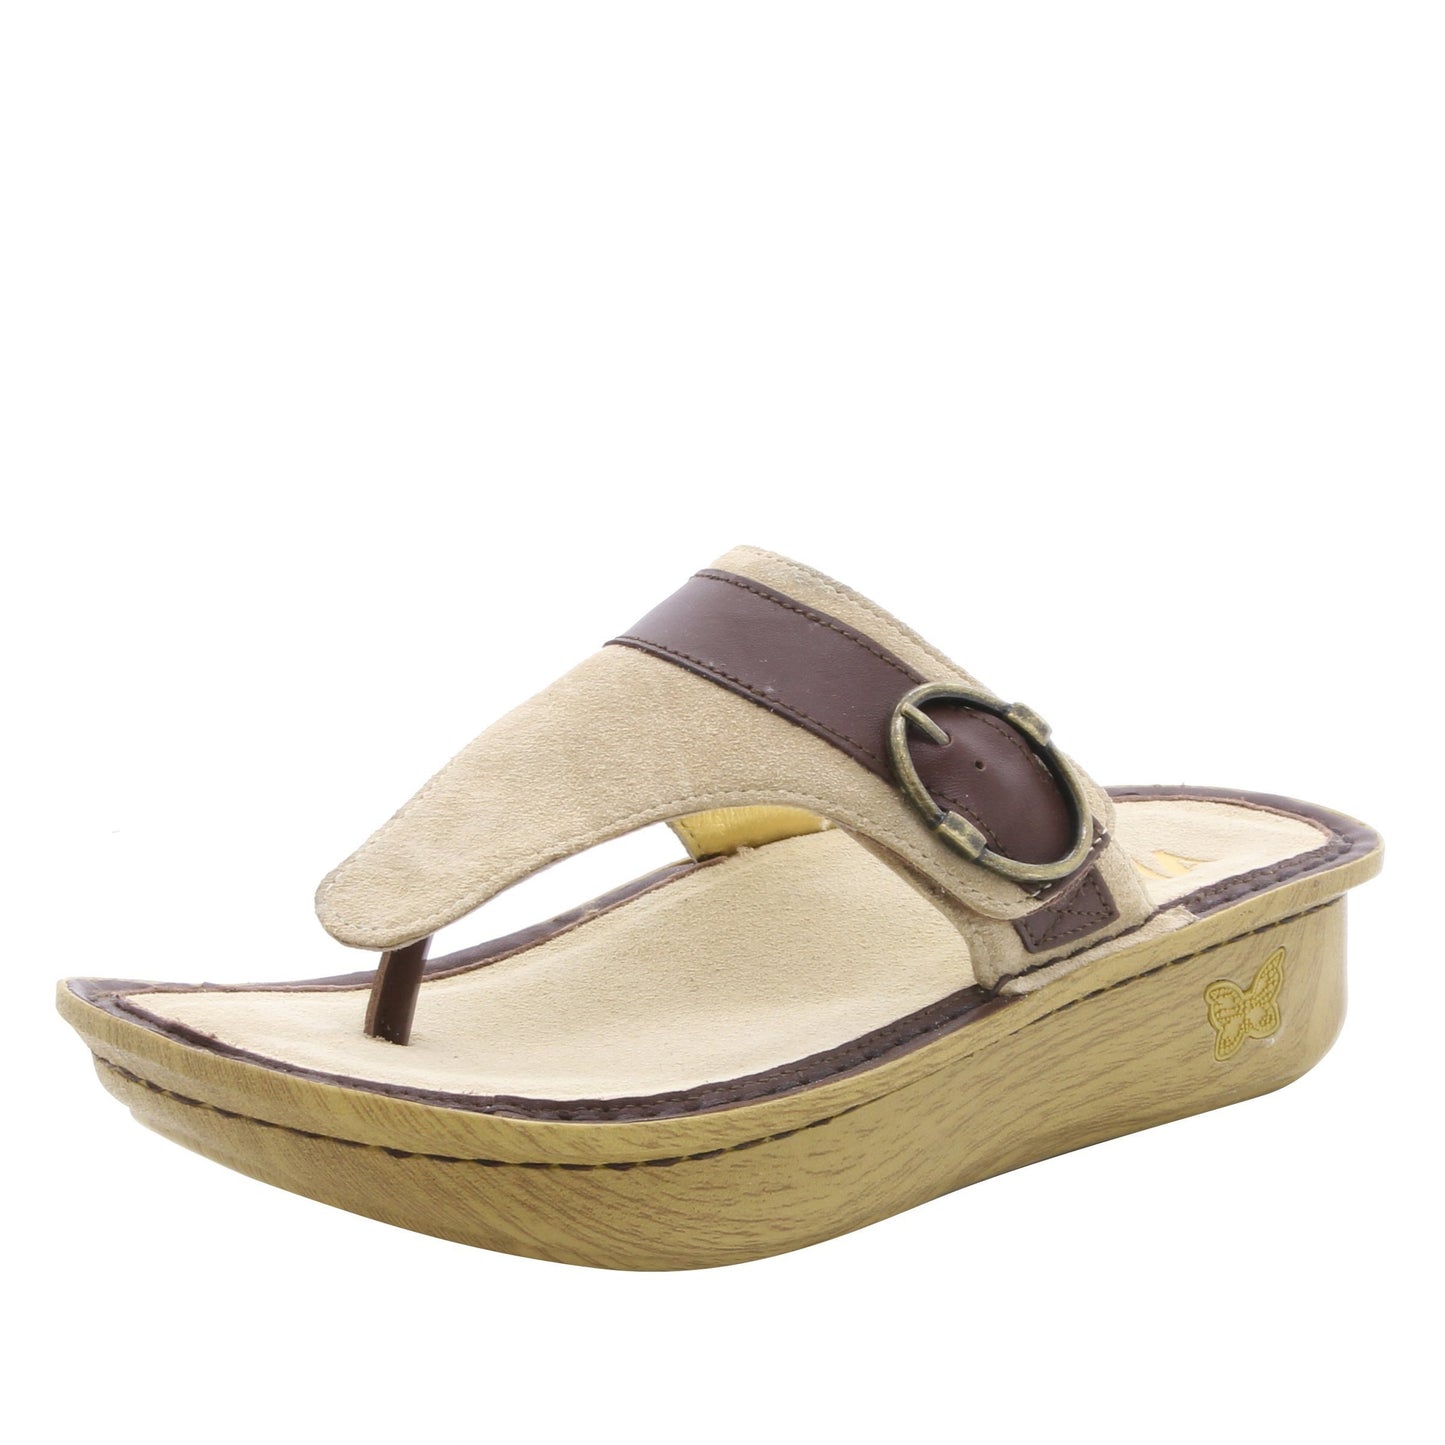 Alegria Sale Shoe Size 36 Cody Thong Sandal in Sand at Parker's Clothing and Shoes.